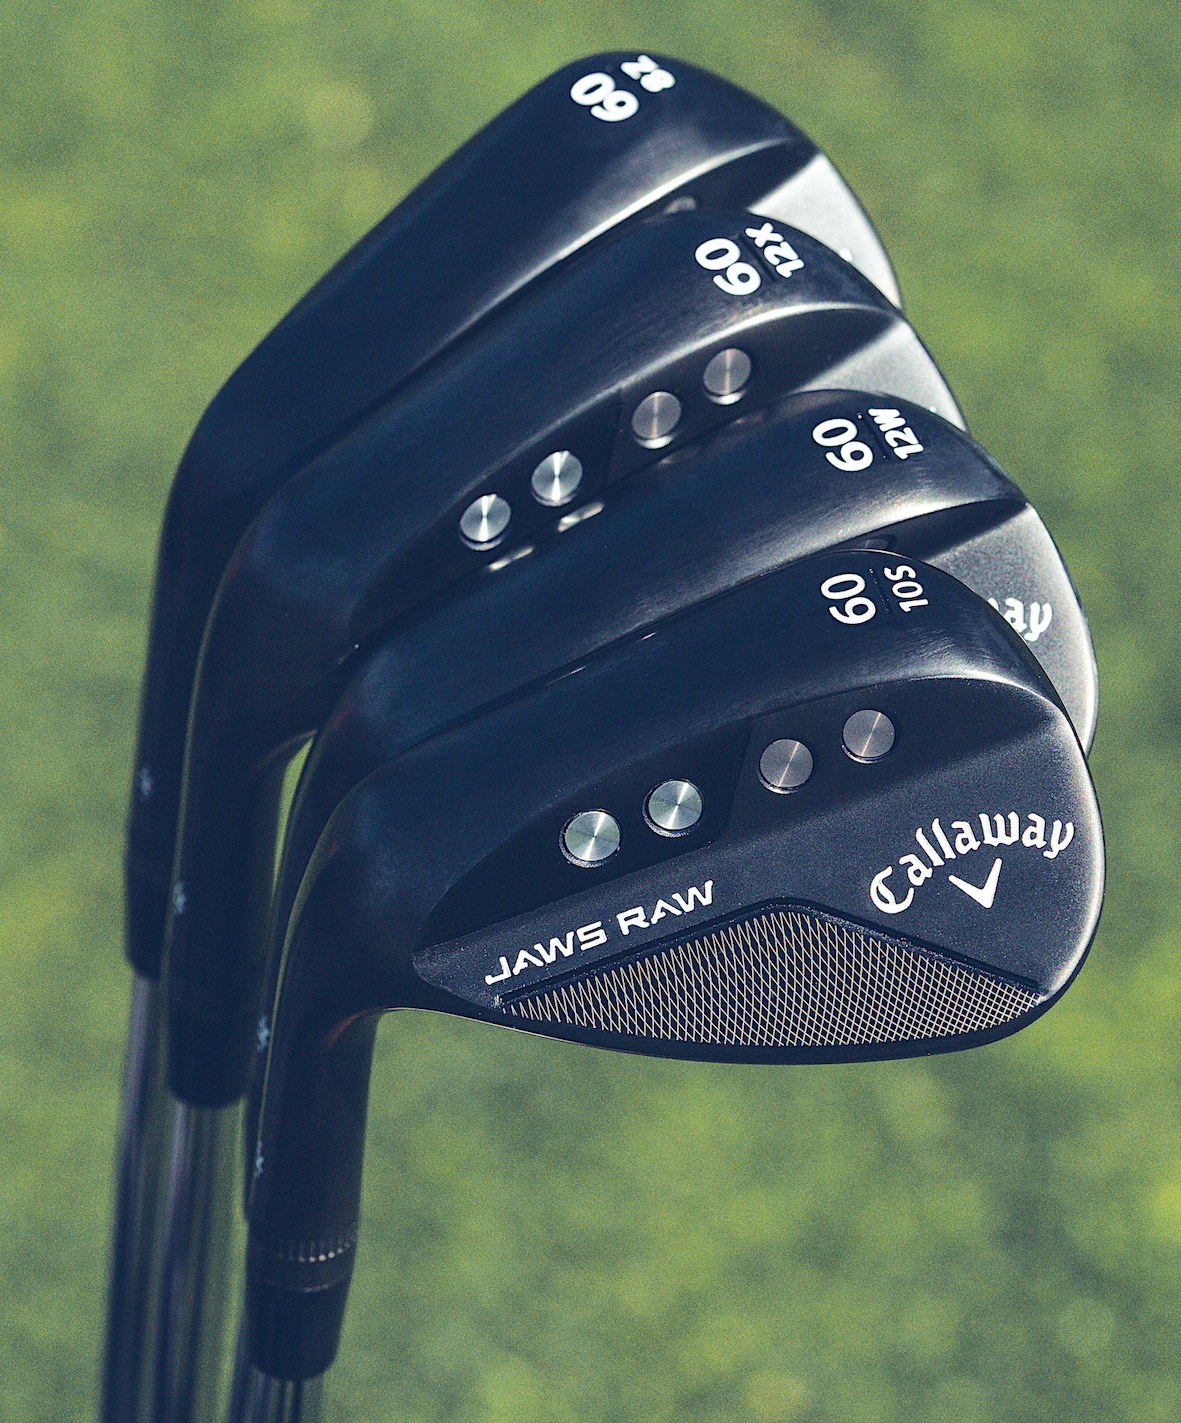 The left-handed versions of the Jaws Raw Black Plasma wedges